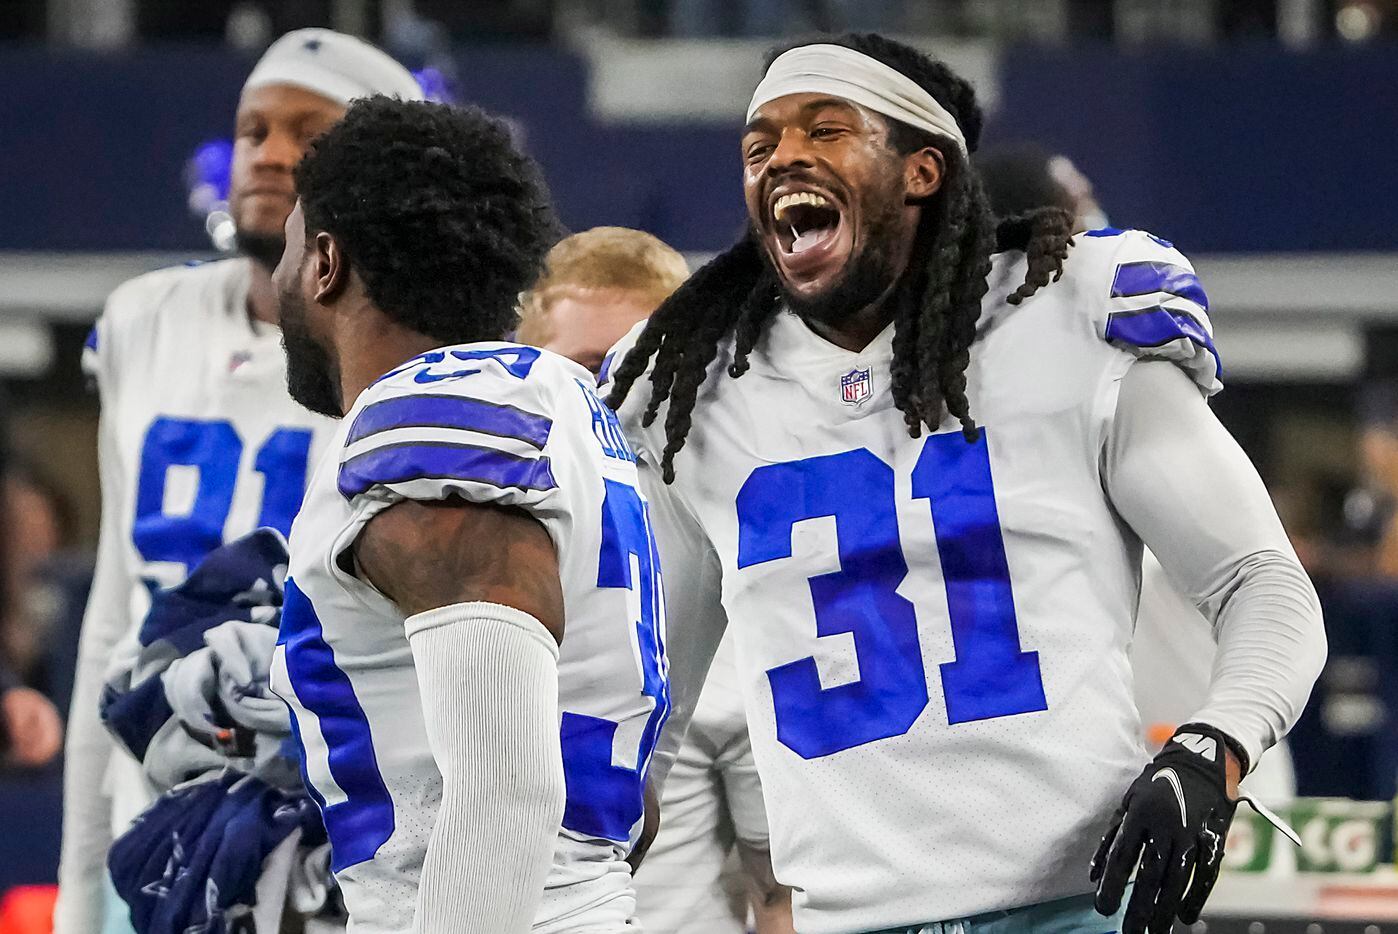 Dallas Cowboys cornerback Maurice Canady (31) laughs on the bench with cornerback Anthony Brown (30) during the second half of an NFL football game against the Washington Football Team at AT&T Stadium on Sunday, Dec. 26, 2021, in Arlington. The Cowboys won the game 56-14.